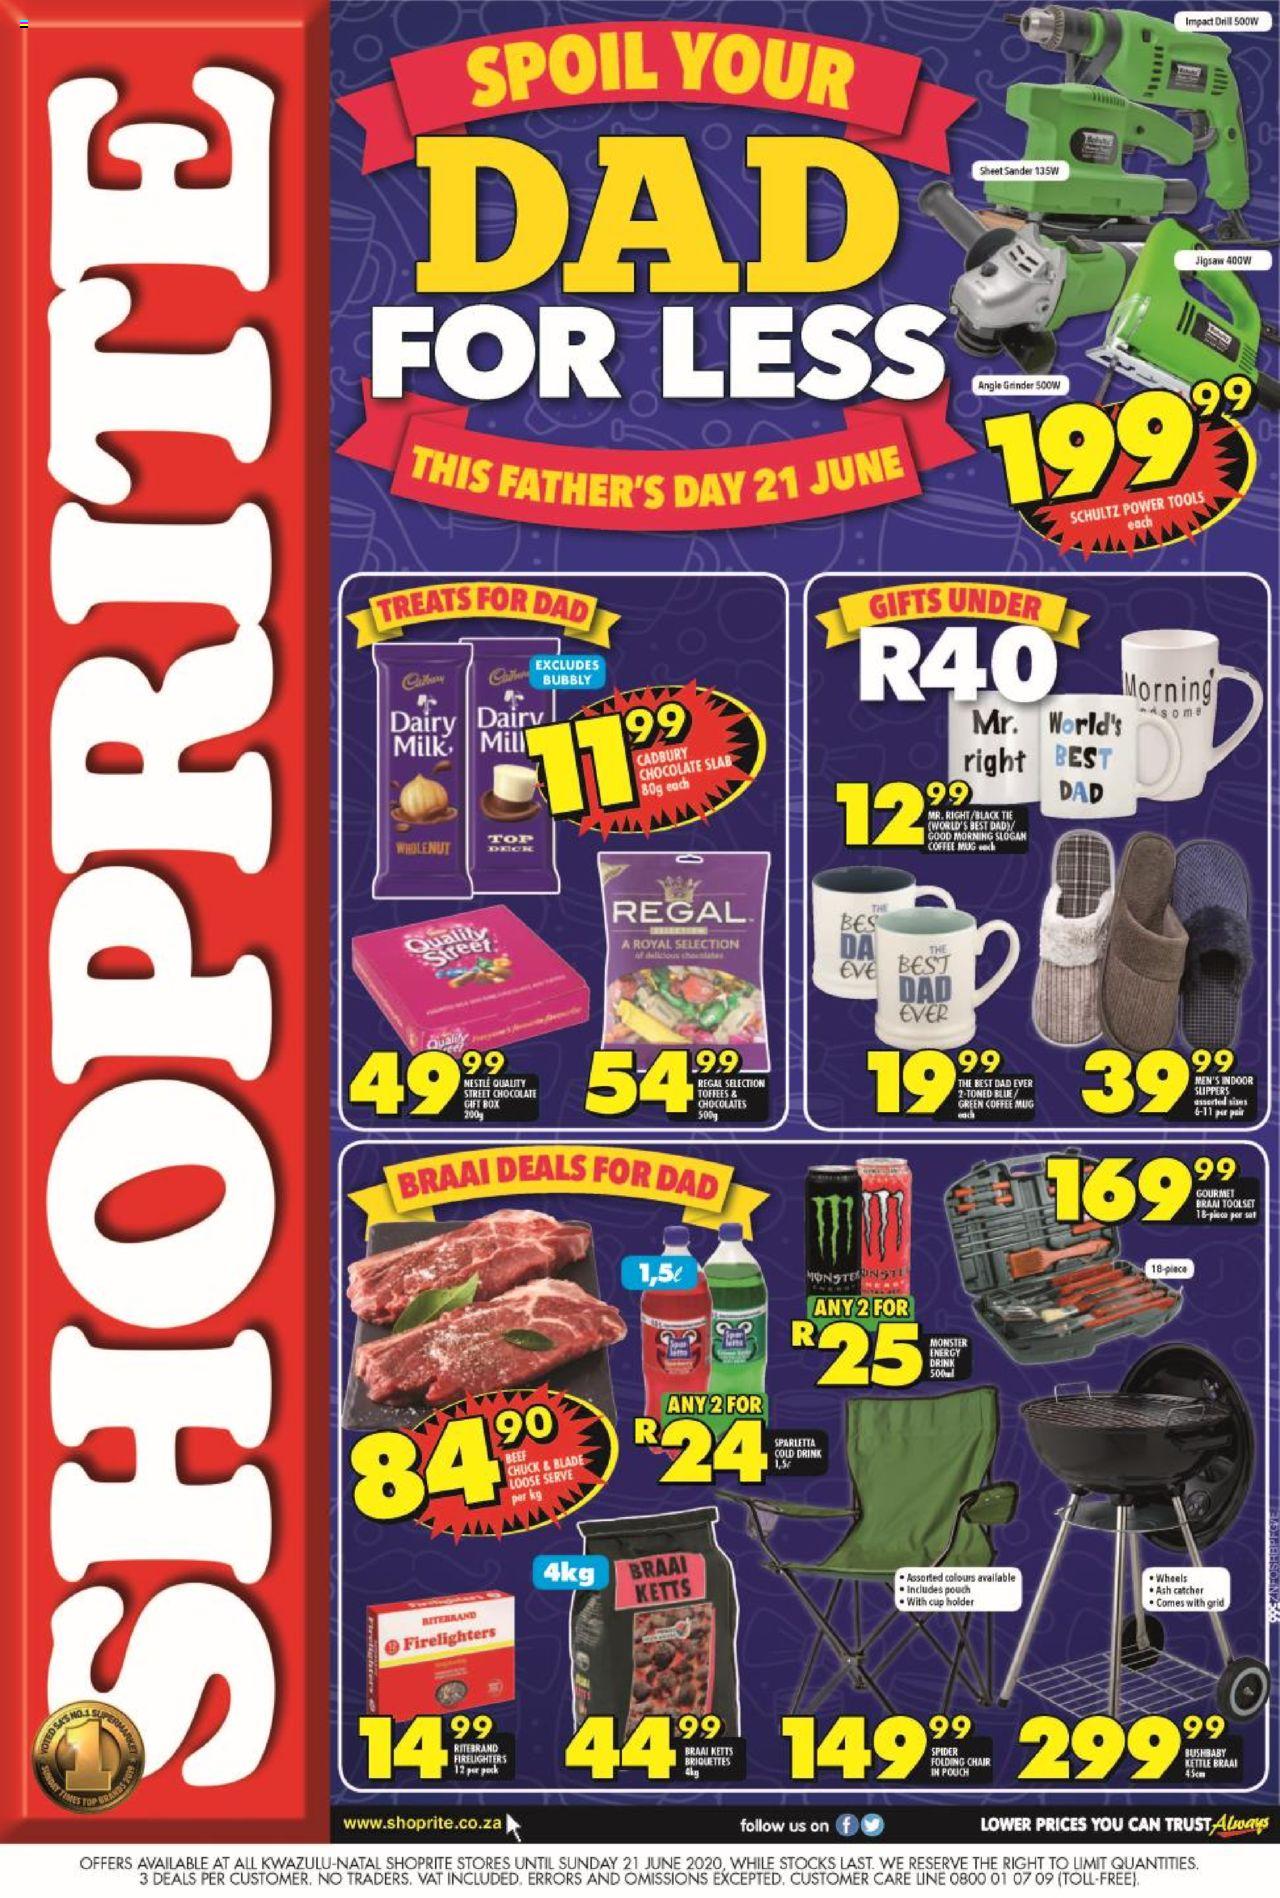 Shoprite Specials Father’s Day Promotion 16 June 2020